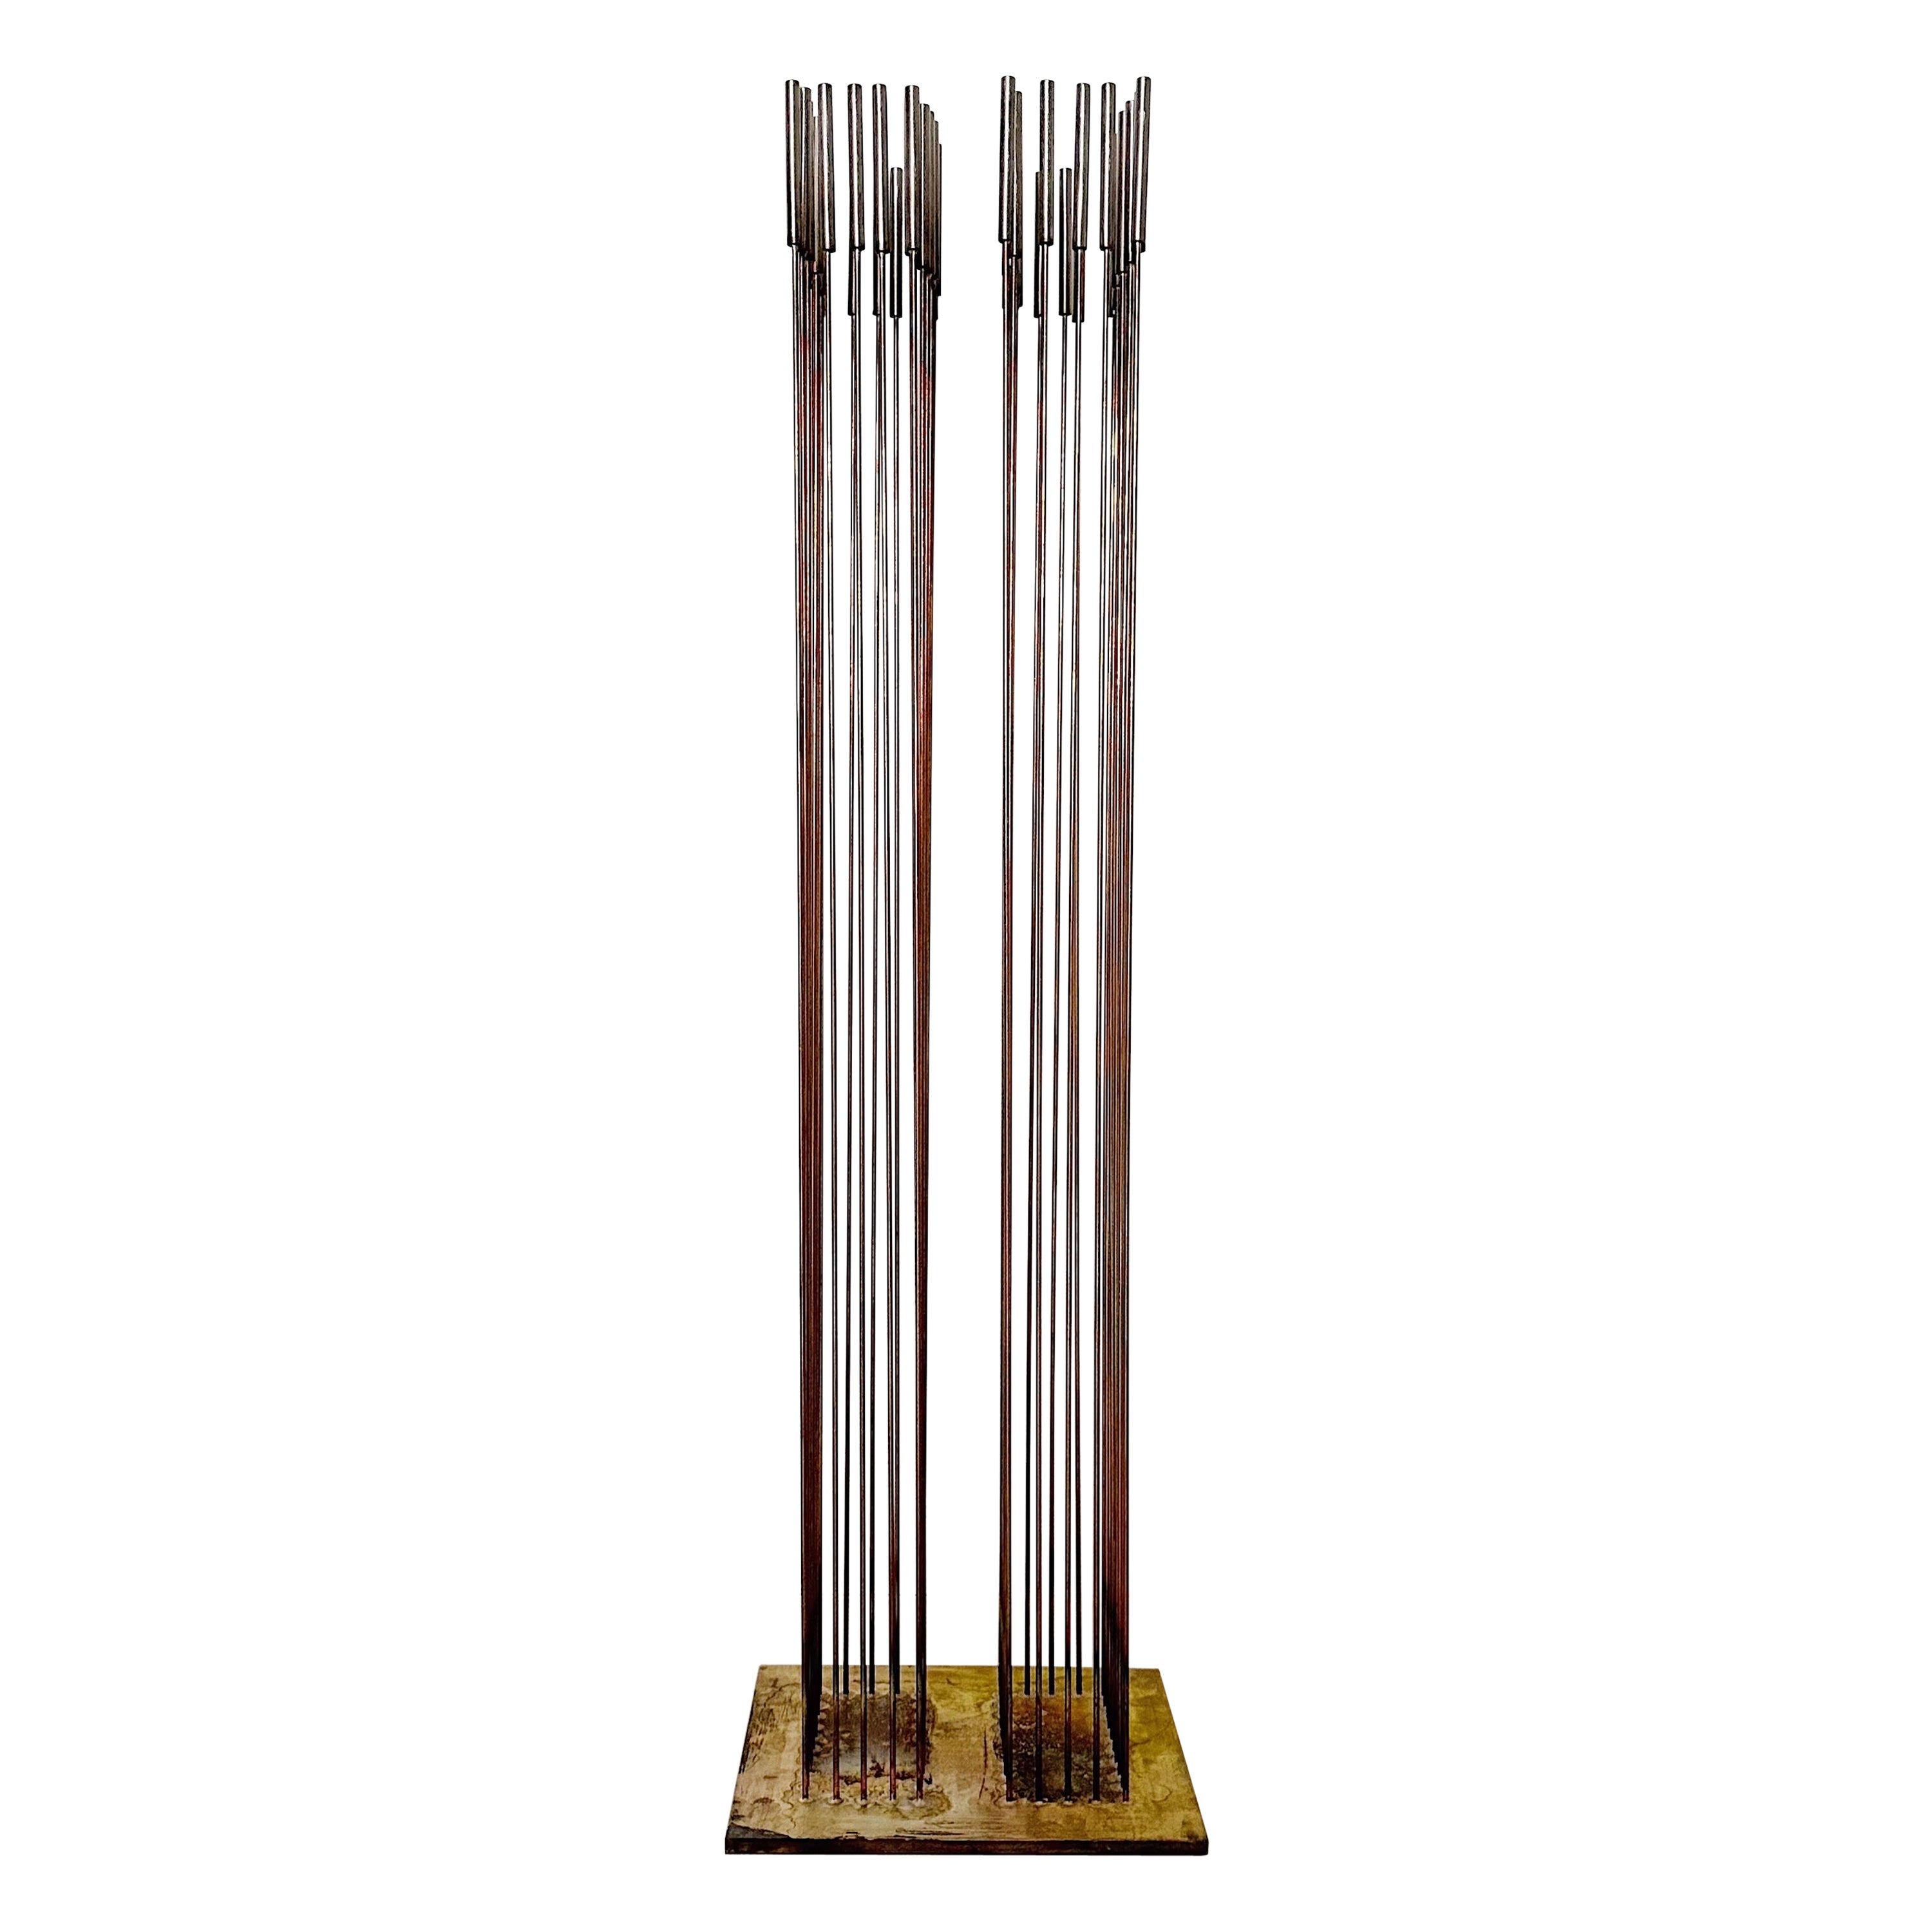 Val Bertoia "Two Alphabets Per Year of Sound" Sounding Sculpture # B-2652